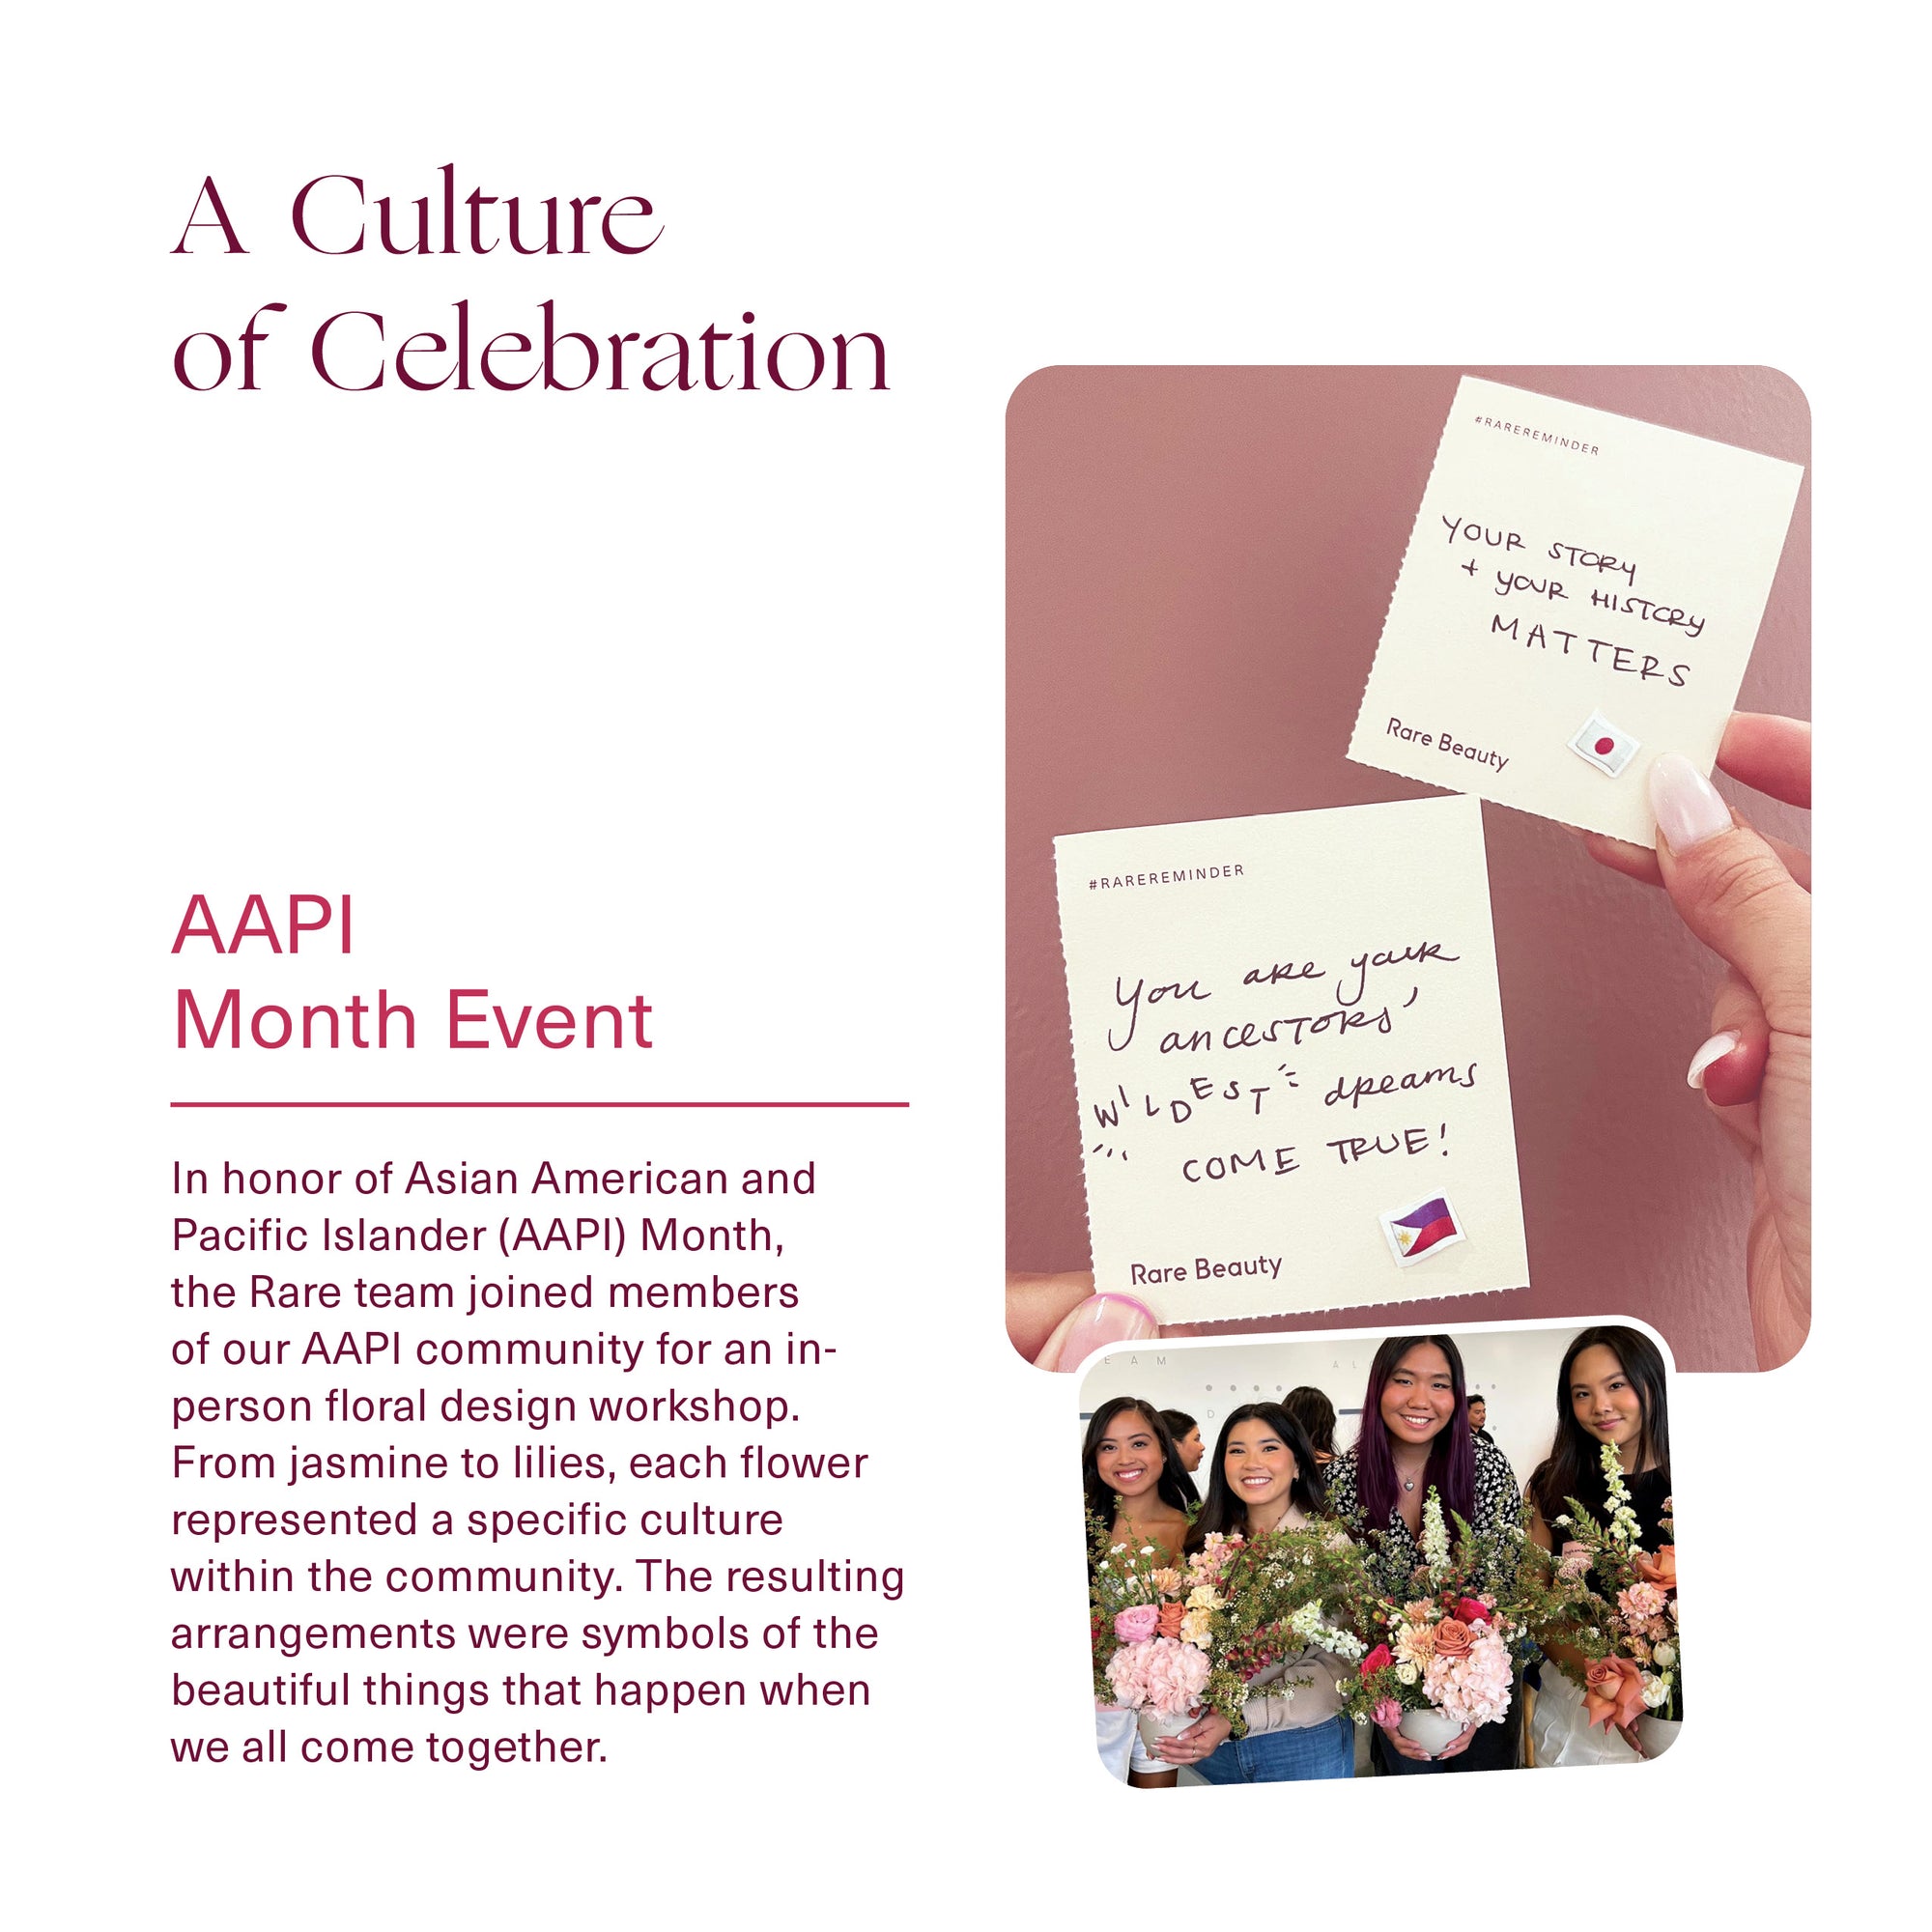 A culture of celebration - AAPI Month Event spread